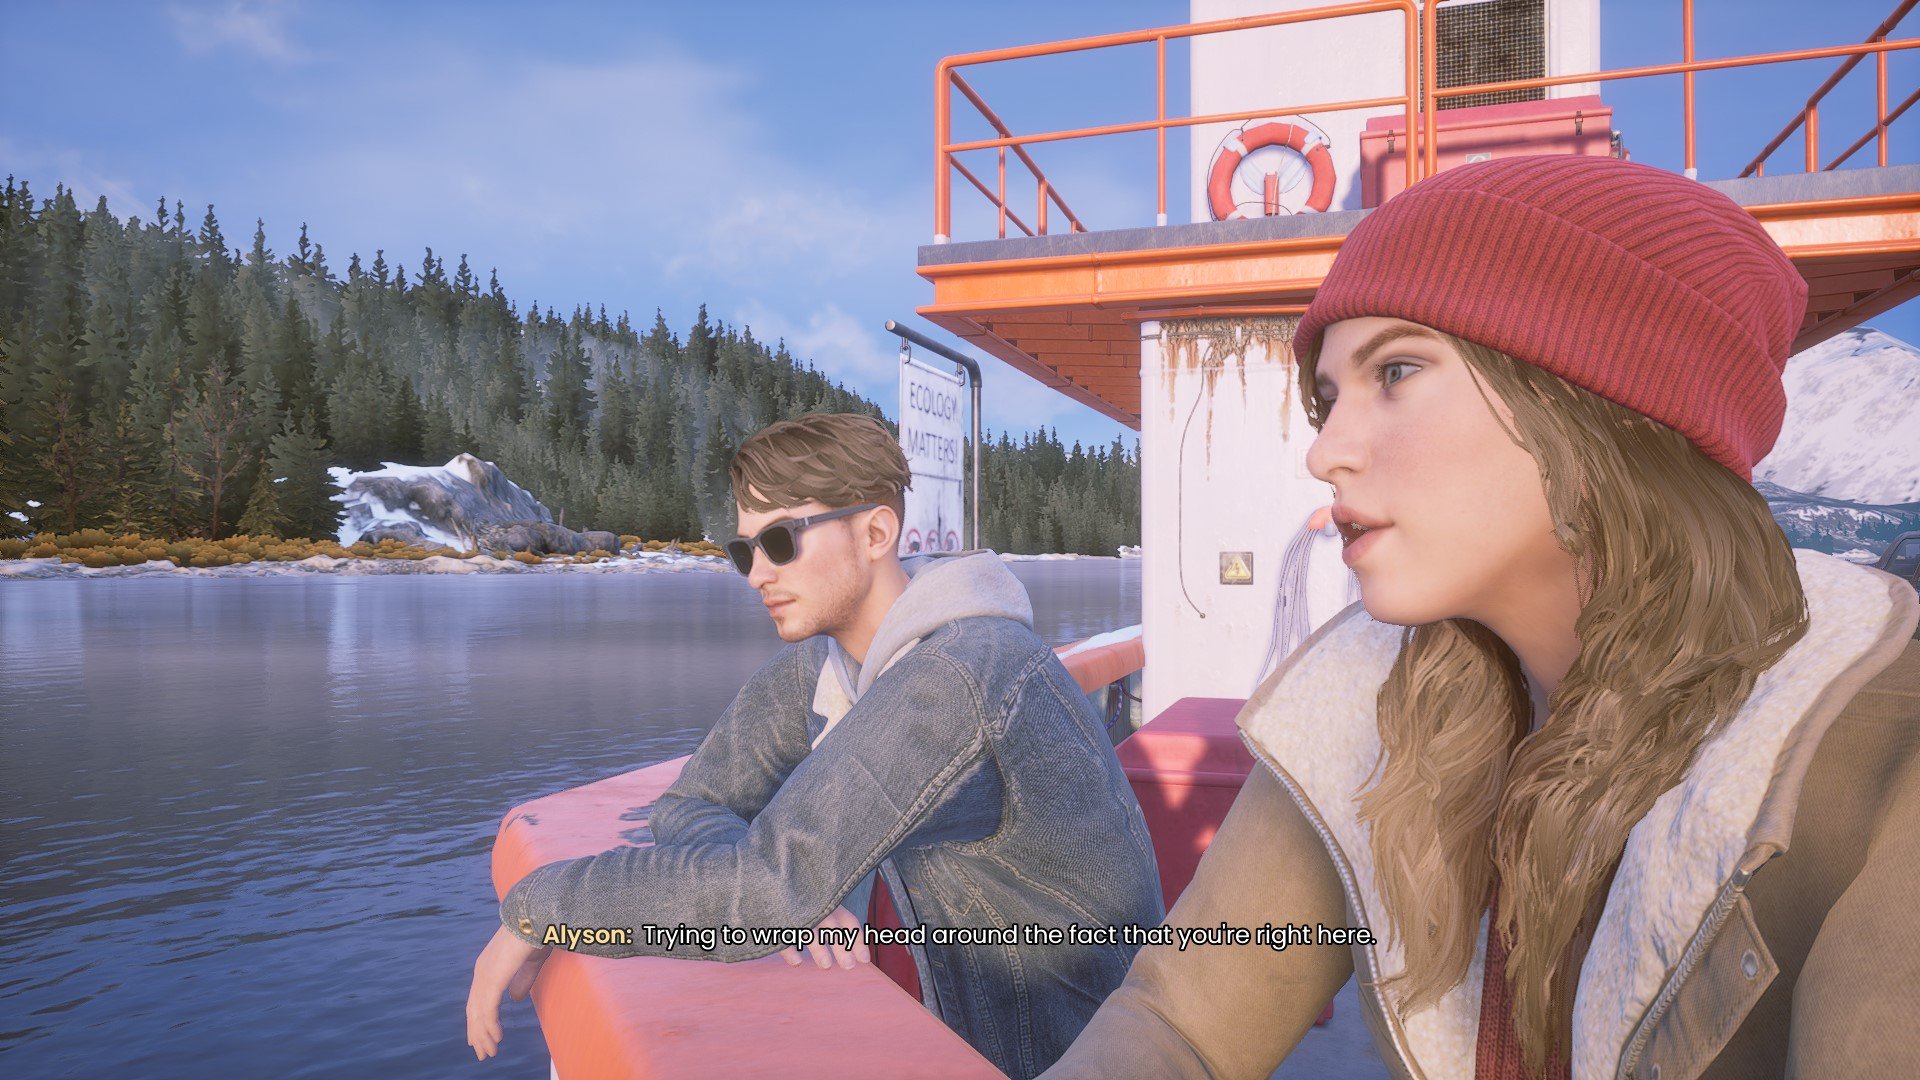 Tyler and Alyson on a boat, talking